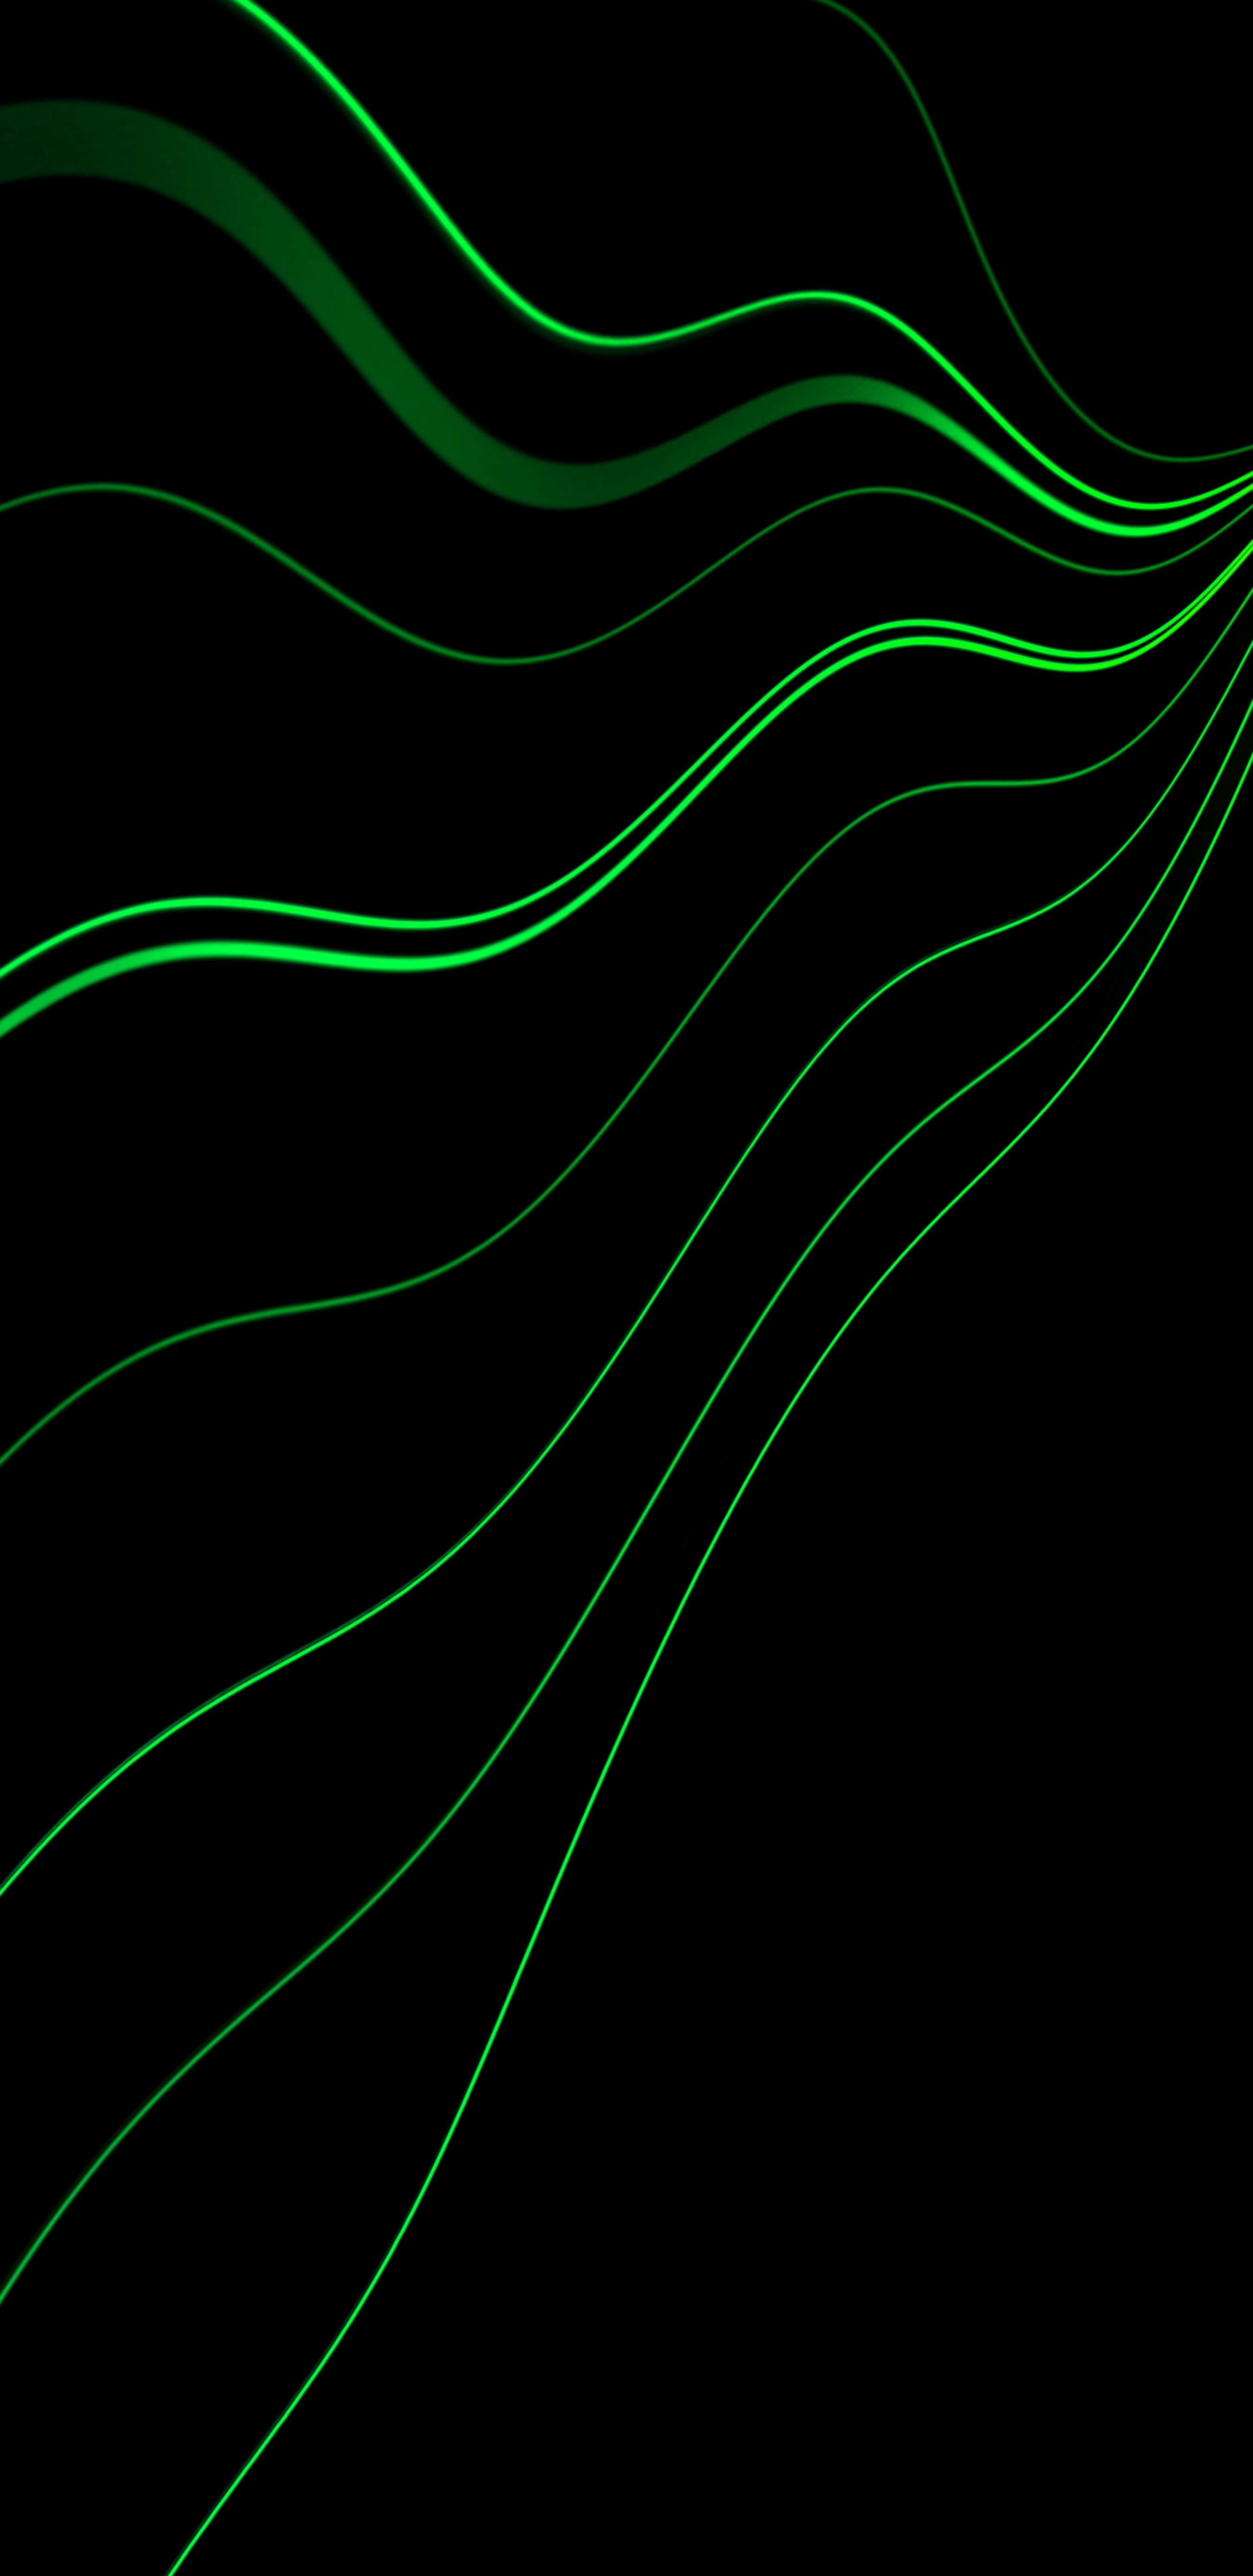 66436 free download Green wallpapers for phone, glow, wavy, lines, black Green images and screensavers for mobile